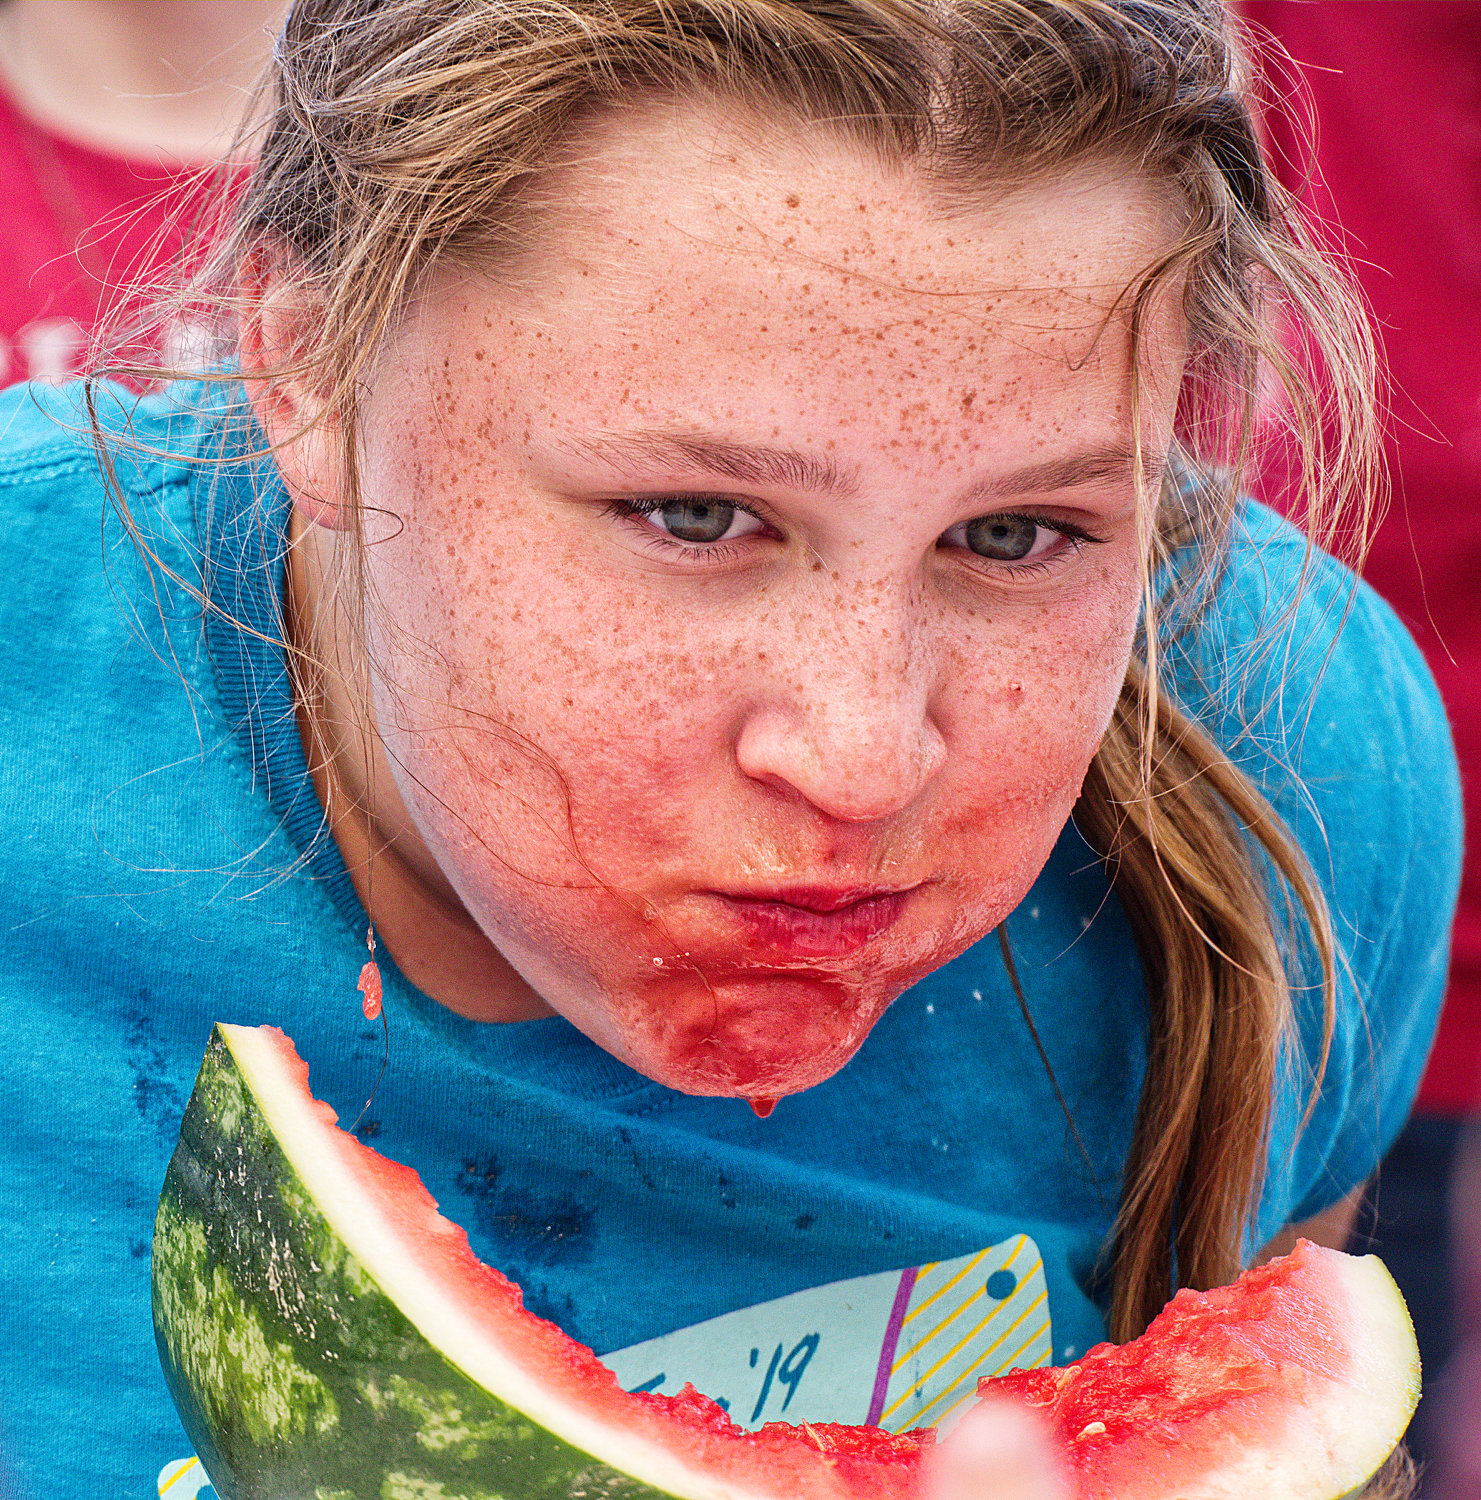 Carlee Cain of Mineola competes in the watermelon-eating contest during the Iron Horse Festival Saturday in downtown Mineola, which she won.